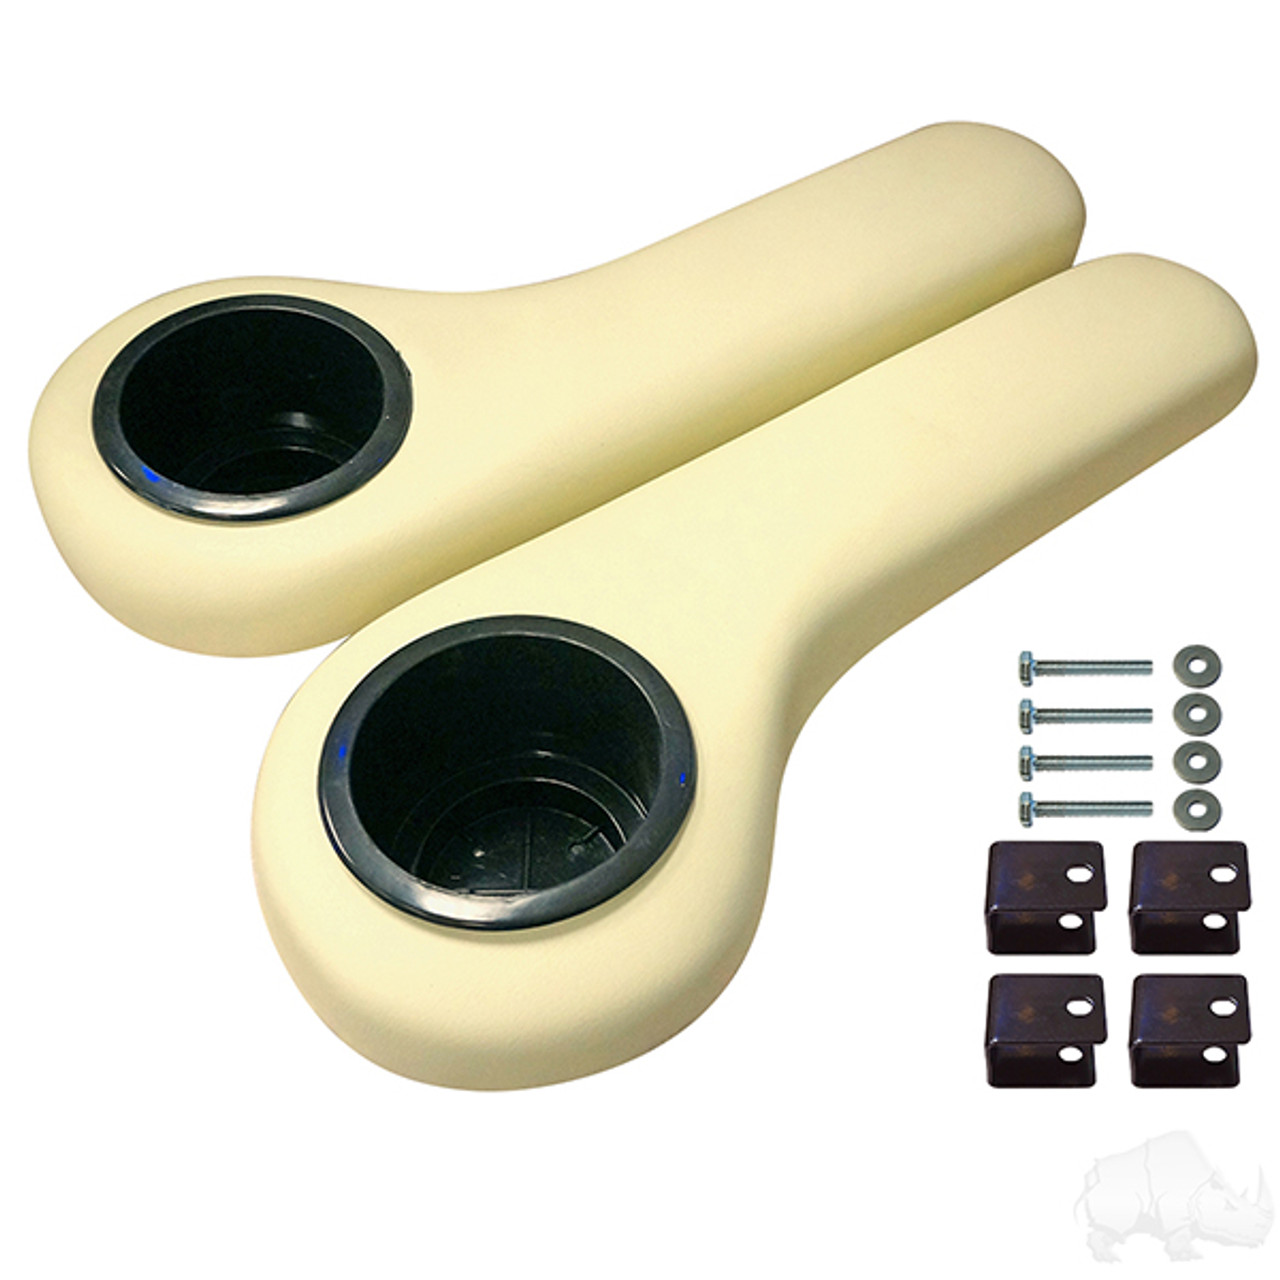 RHOX Rear Seat Kit Arm Rest Set with Cup Holder, Ivory